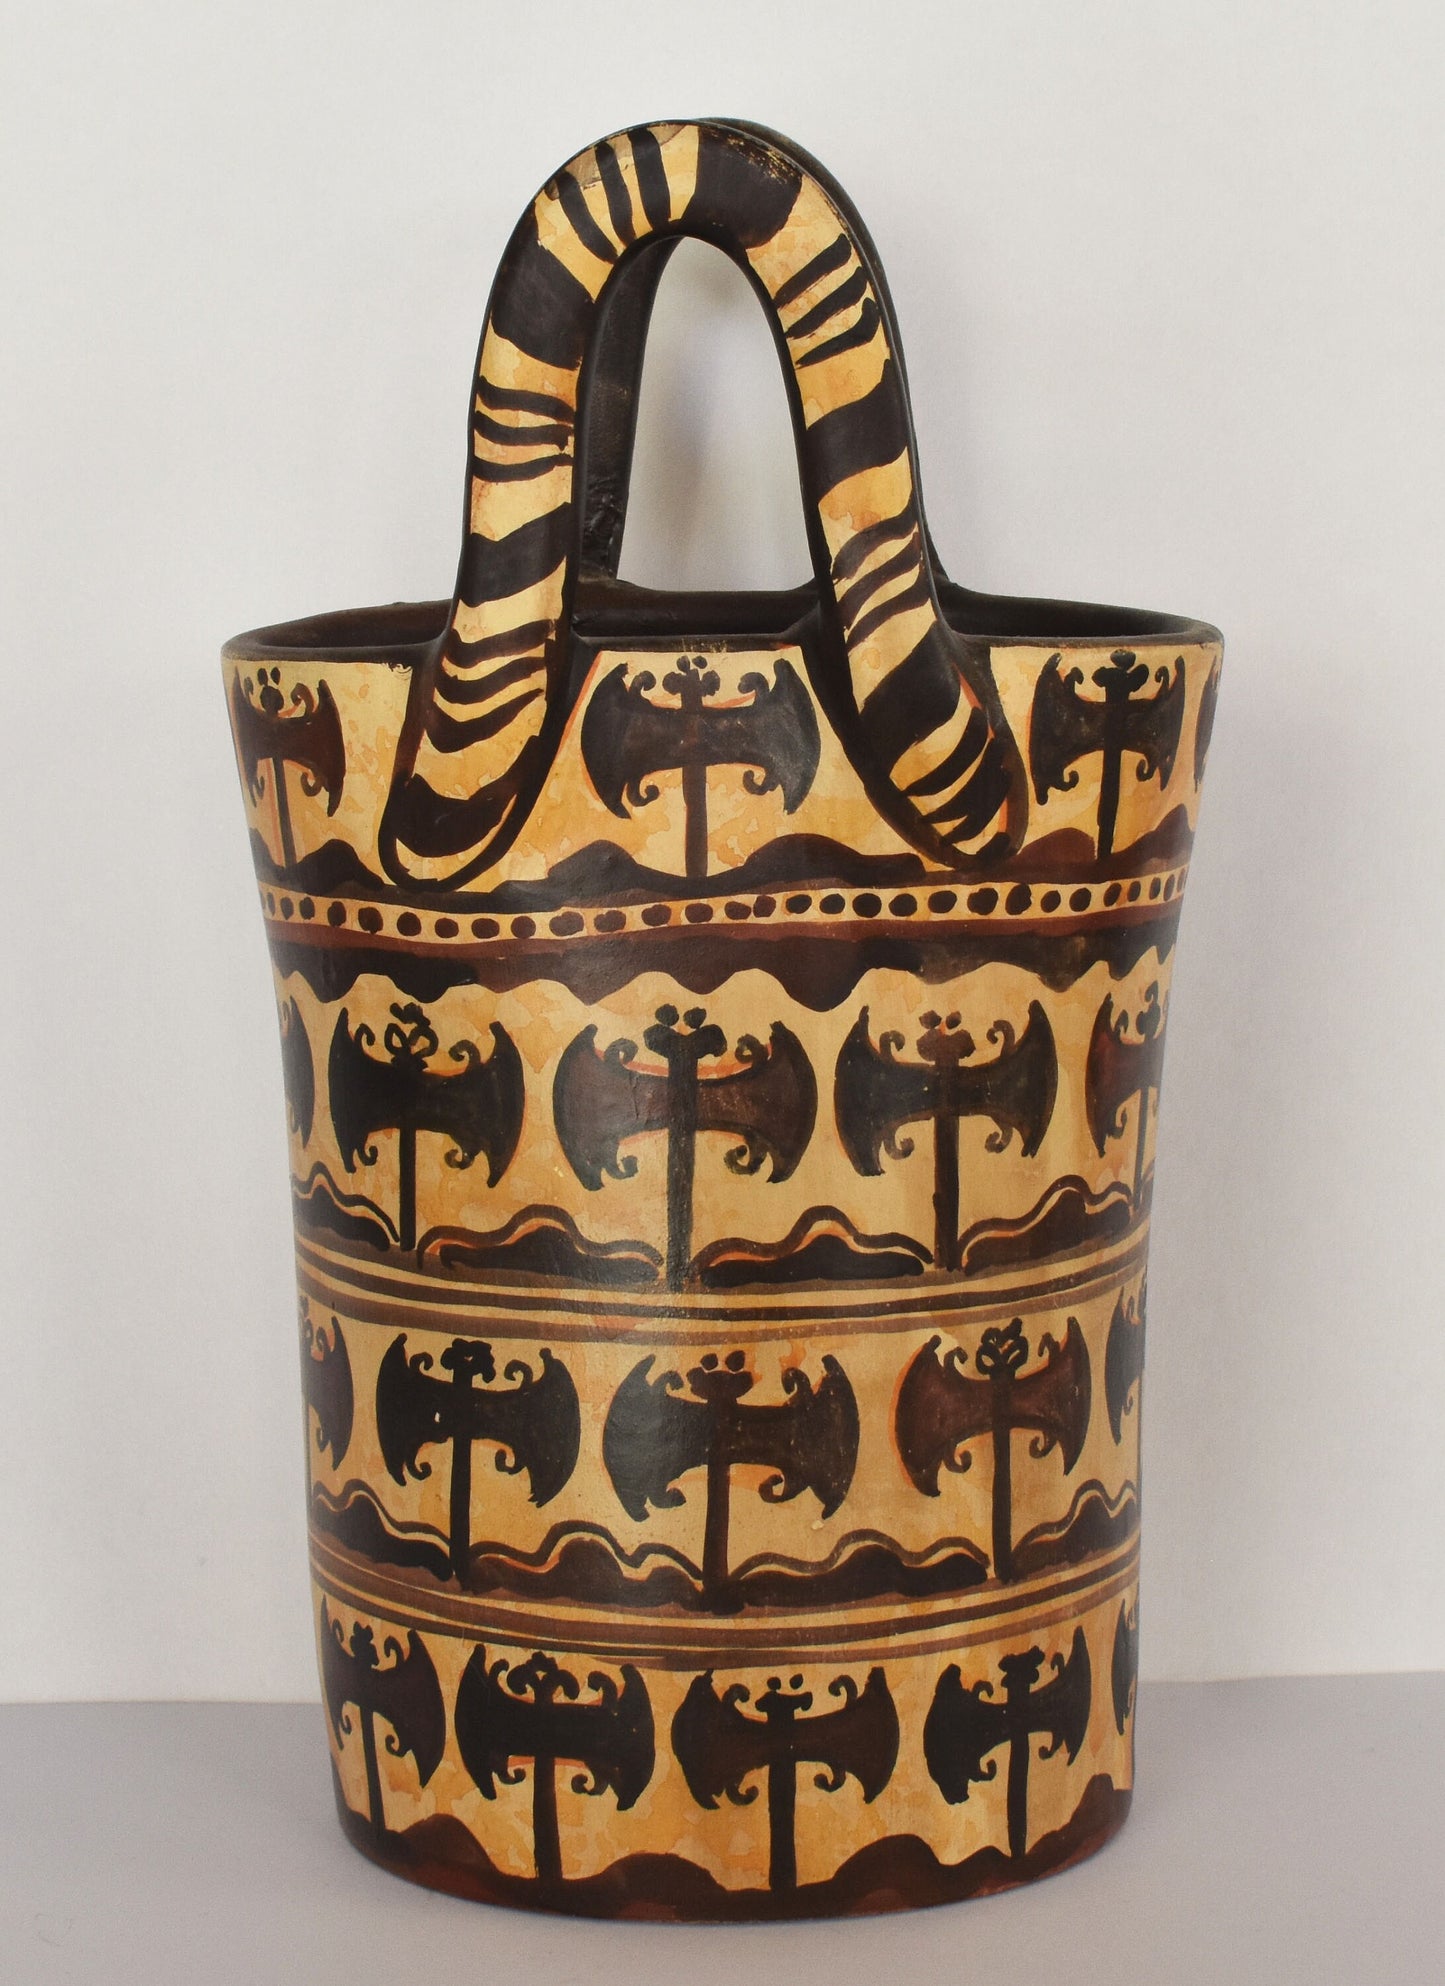 Basket shaped Vessel with double axes - Minoan - Special Palatial Tradition-Pseira 1800 BC - Heraklion Archaeological Museum - Ceramic Vase